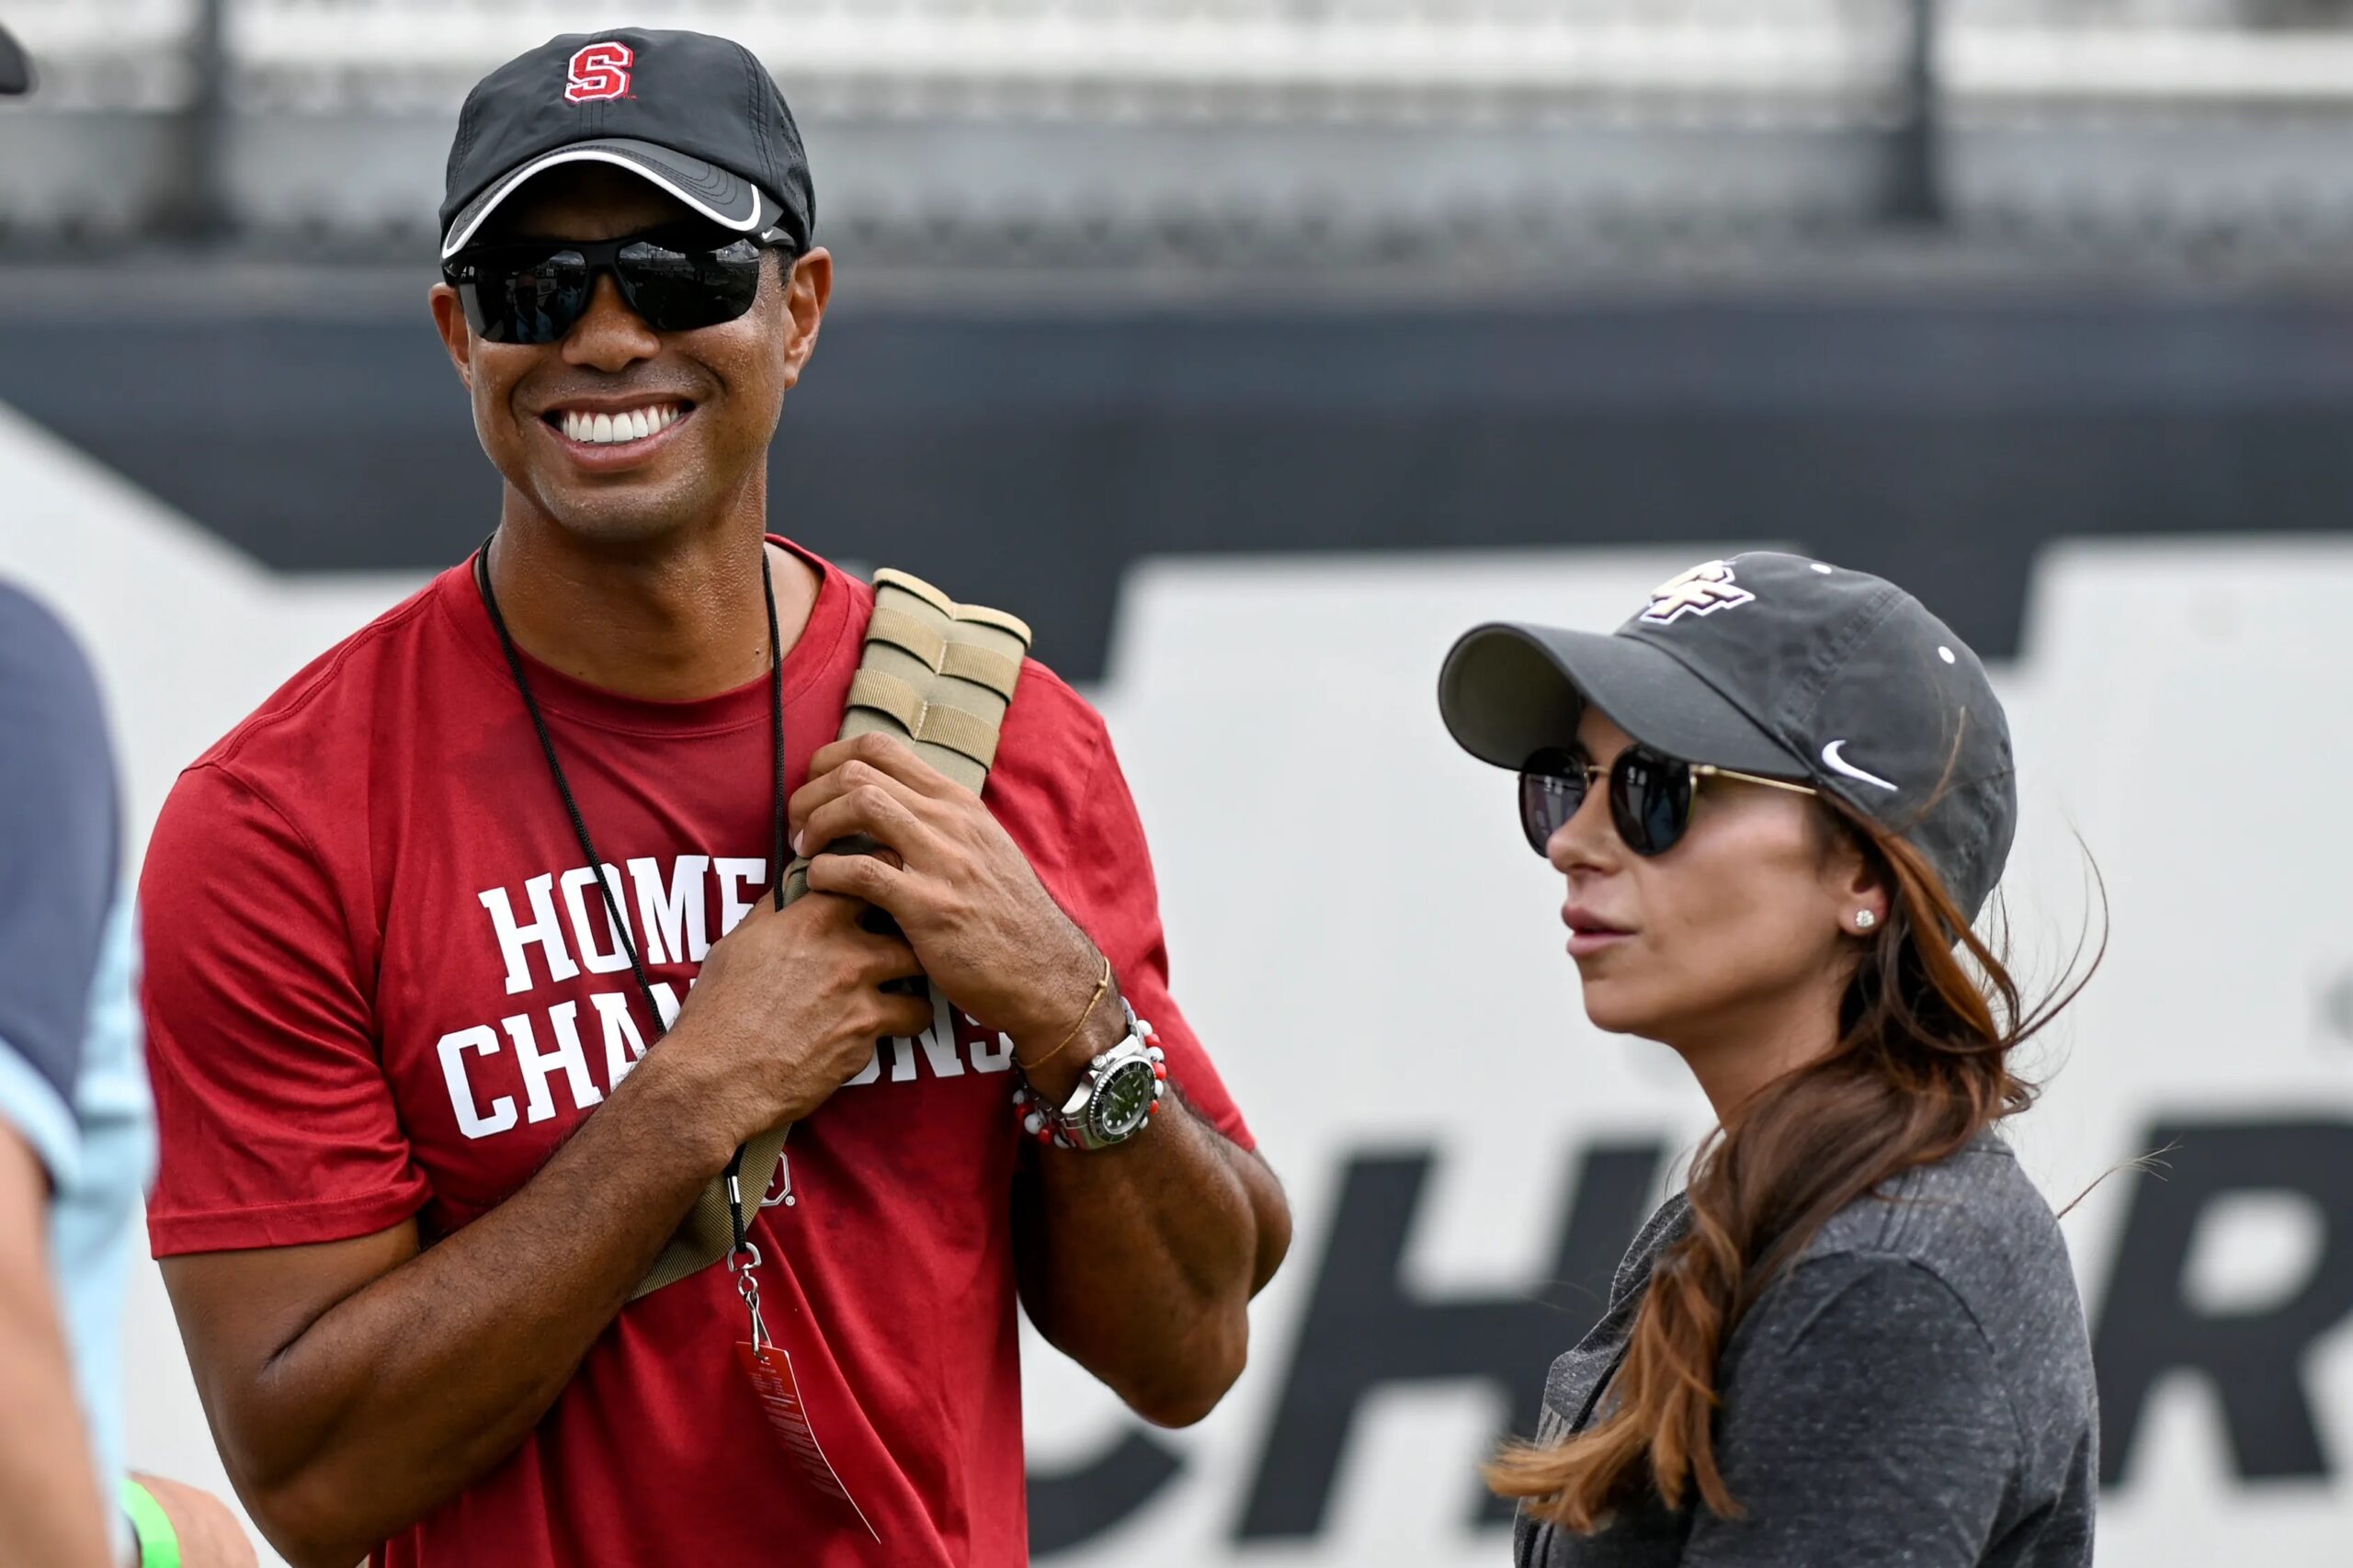 Tiger Woods says Erica Herman is a jilted ex